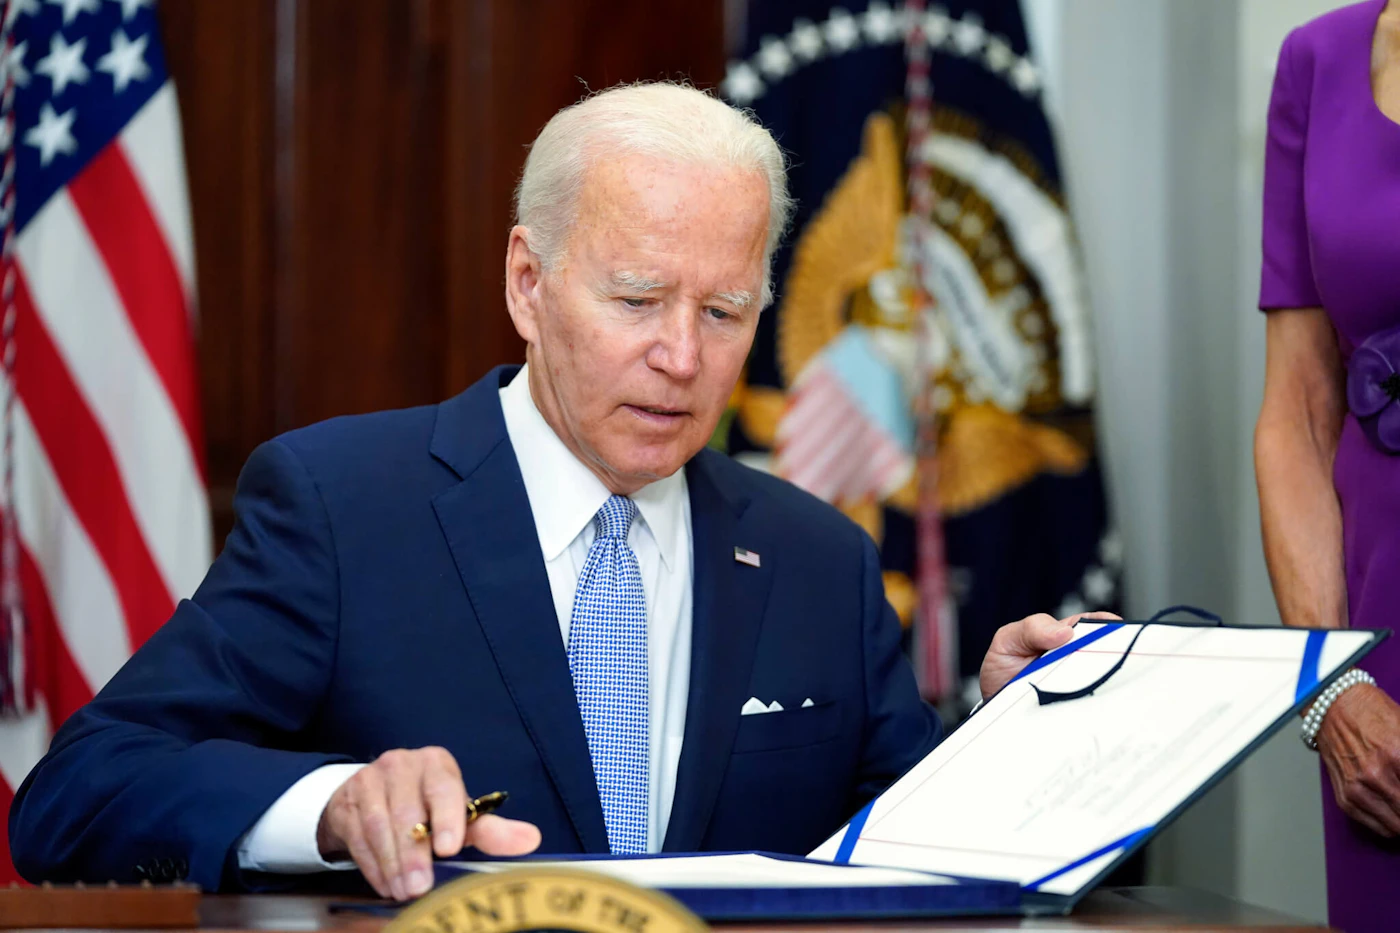 FILE - President Joe Biden signs into law S. 2938, the Bipartisan Safer Communities Act gun safety bill, in the Roosevelt Room of the White House in Washington, June 25, 2022. (AP Photo/Pablo Martinez Monsivais, File)